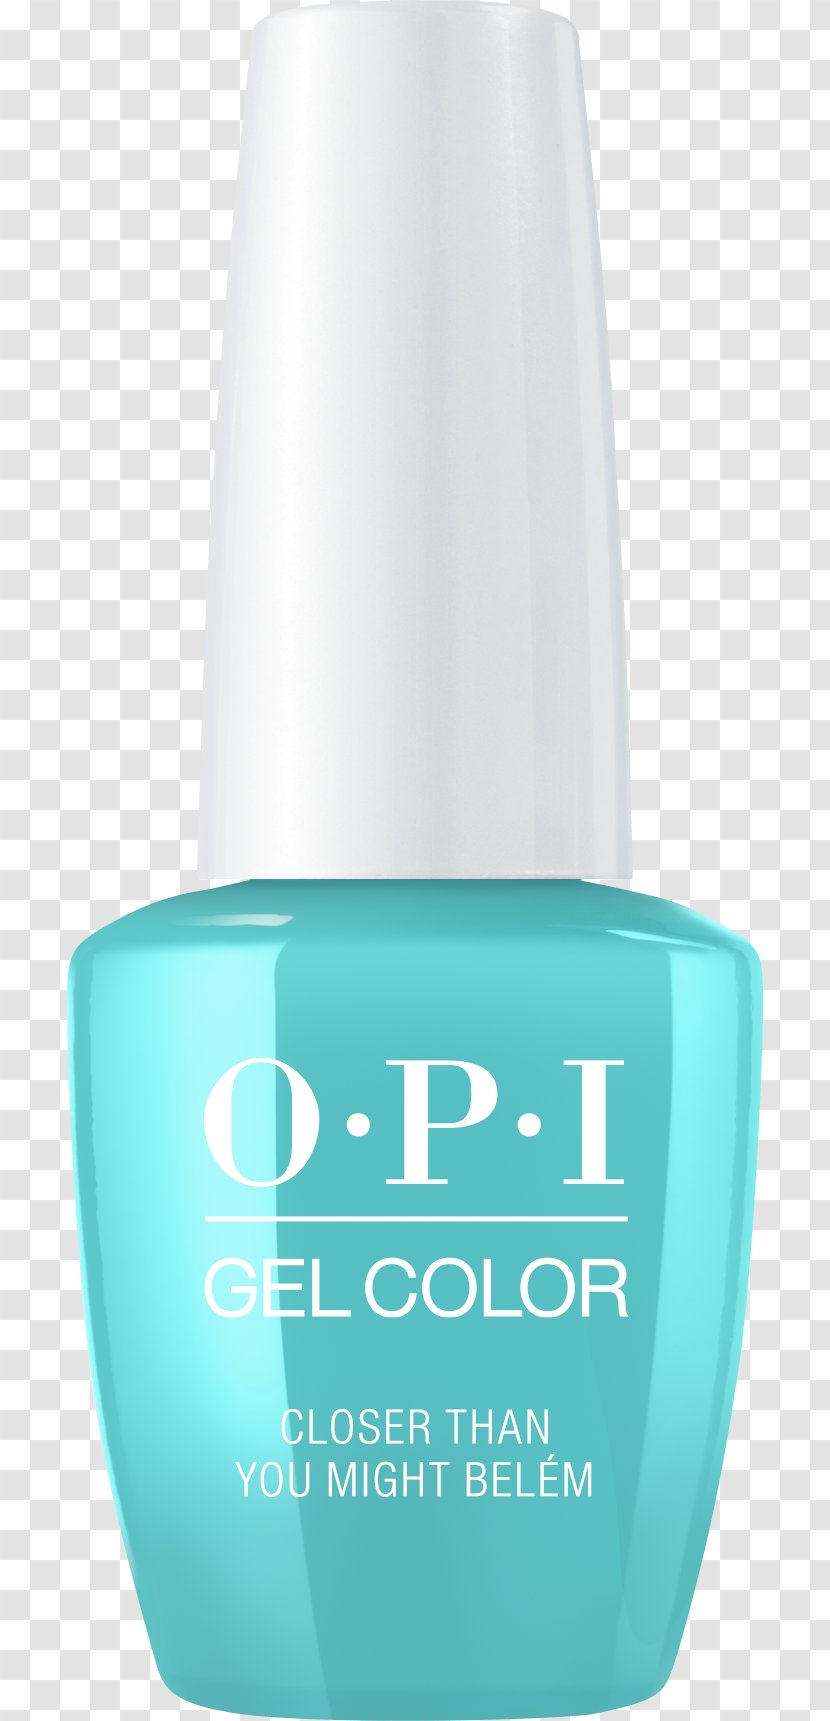 OPI GelColor Nail Polish Products Gel Nails Transparent PNG